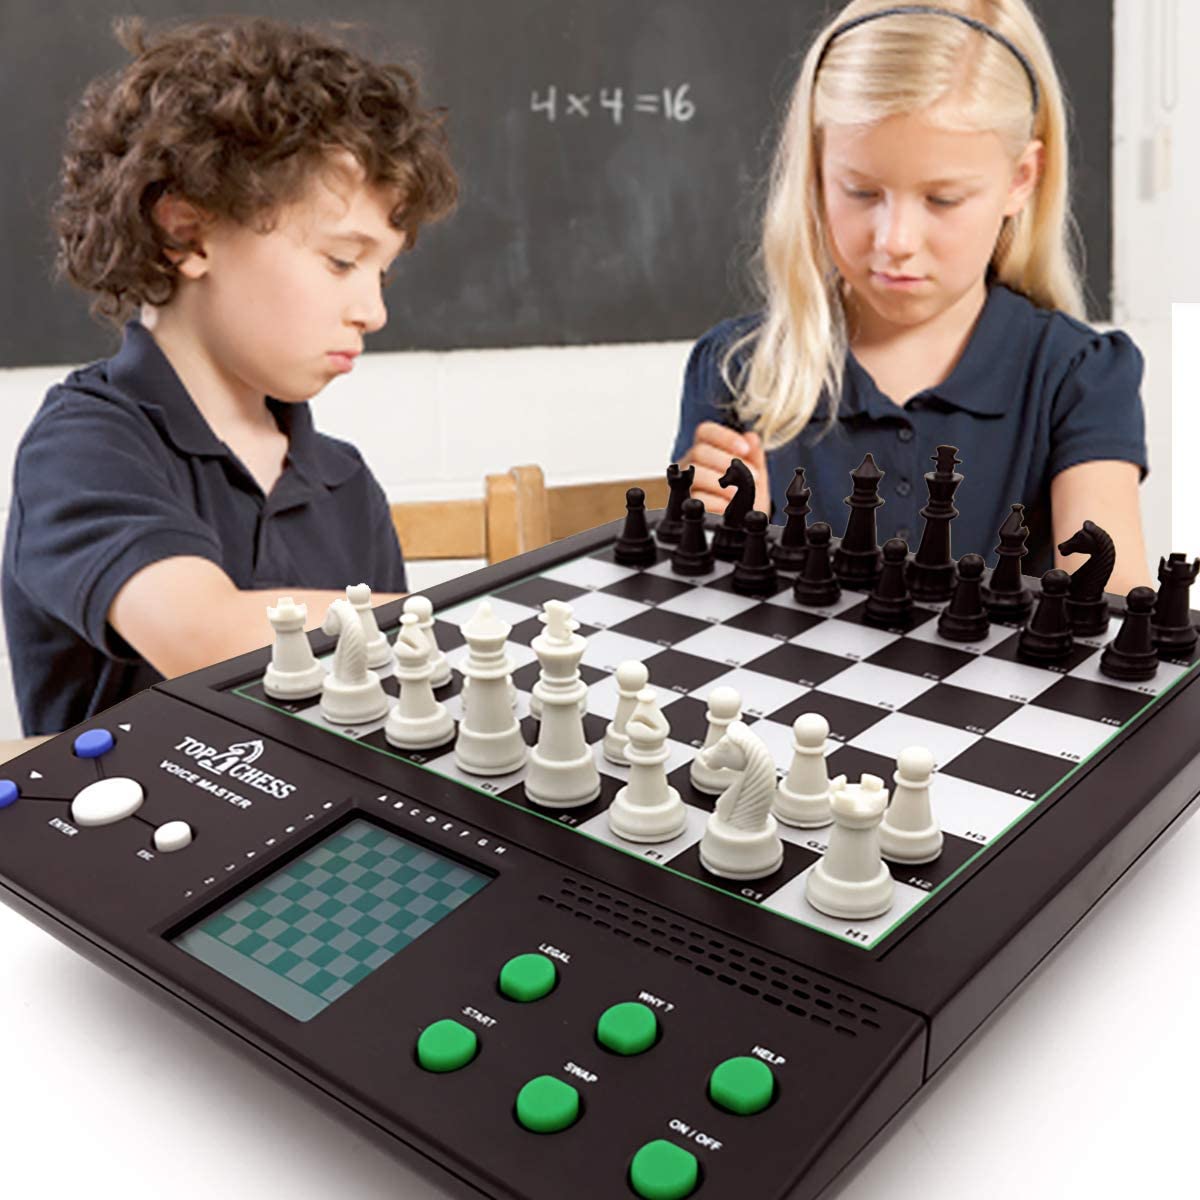 Top 1 Chess Electronic Chess Set | Chess Sets for Adults | Chess Set for Kids | Voice Chess Computer Teaching System | Chess Strategy Beginners Improving | Large Screen Learning Chess Set Board Game - image 4 of 7